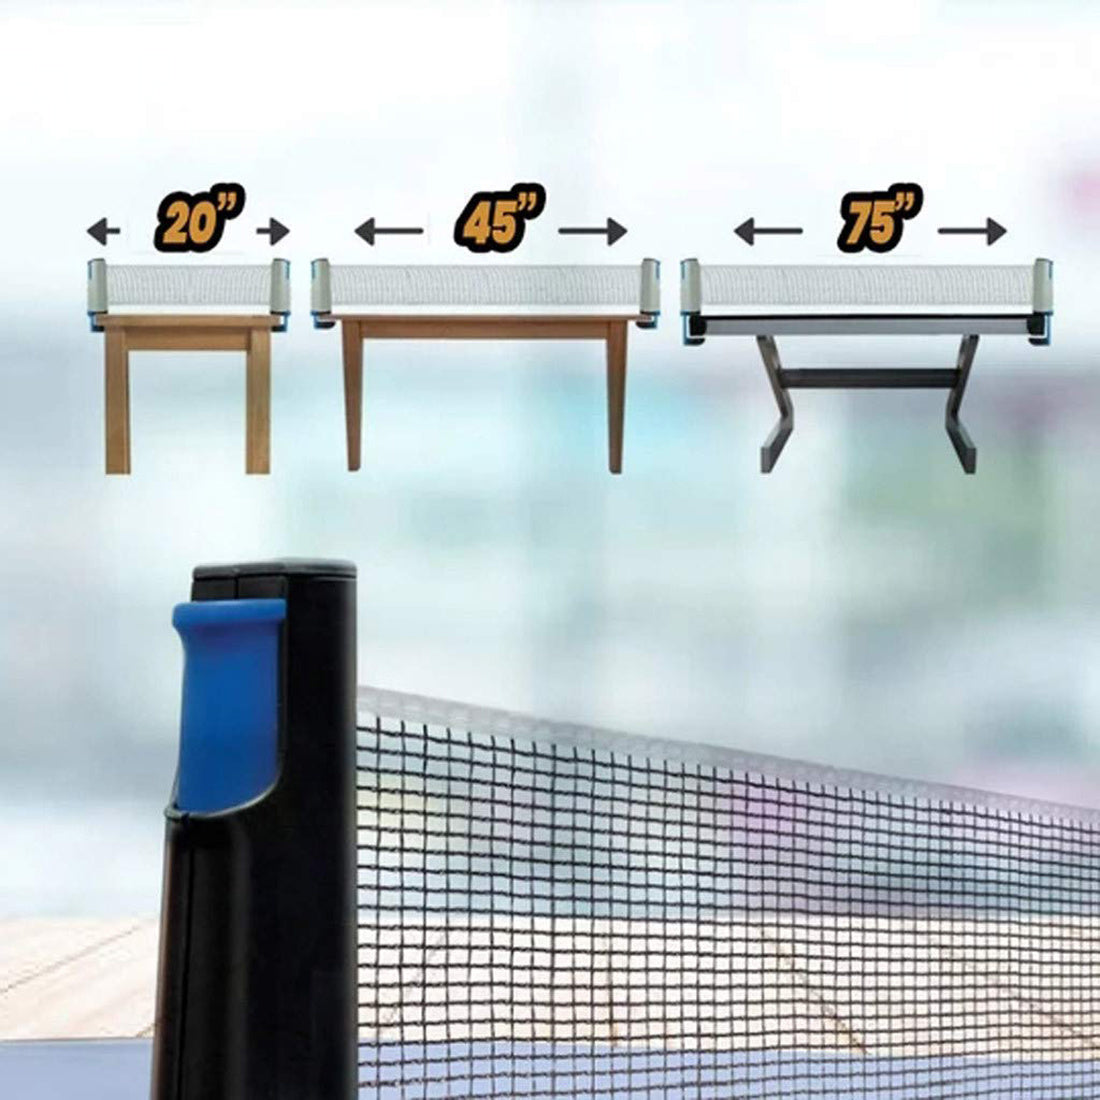 Ping Pong Portable Net and Post Set with PVC Storage Bag, Retractable Table Tennis Net Replacement, 6 Feet 1.8 M, Fits Tables Up to 2.0 inch (5.0 cm) - WoodPoly.com